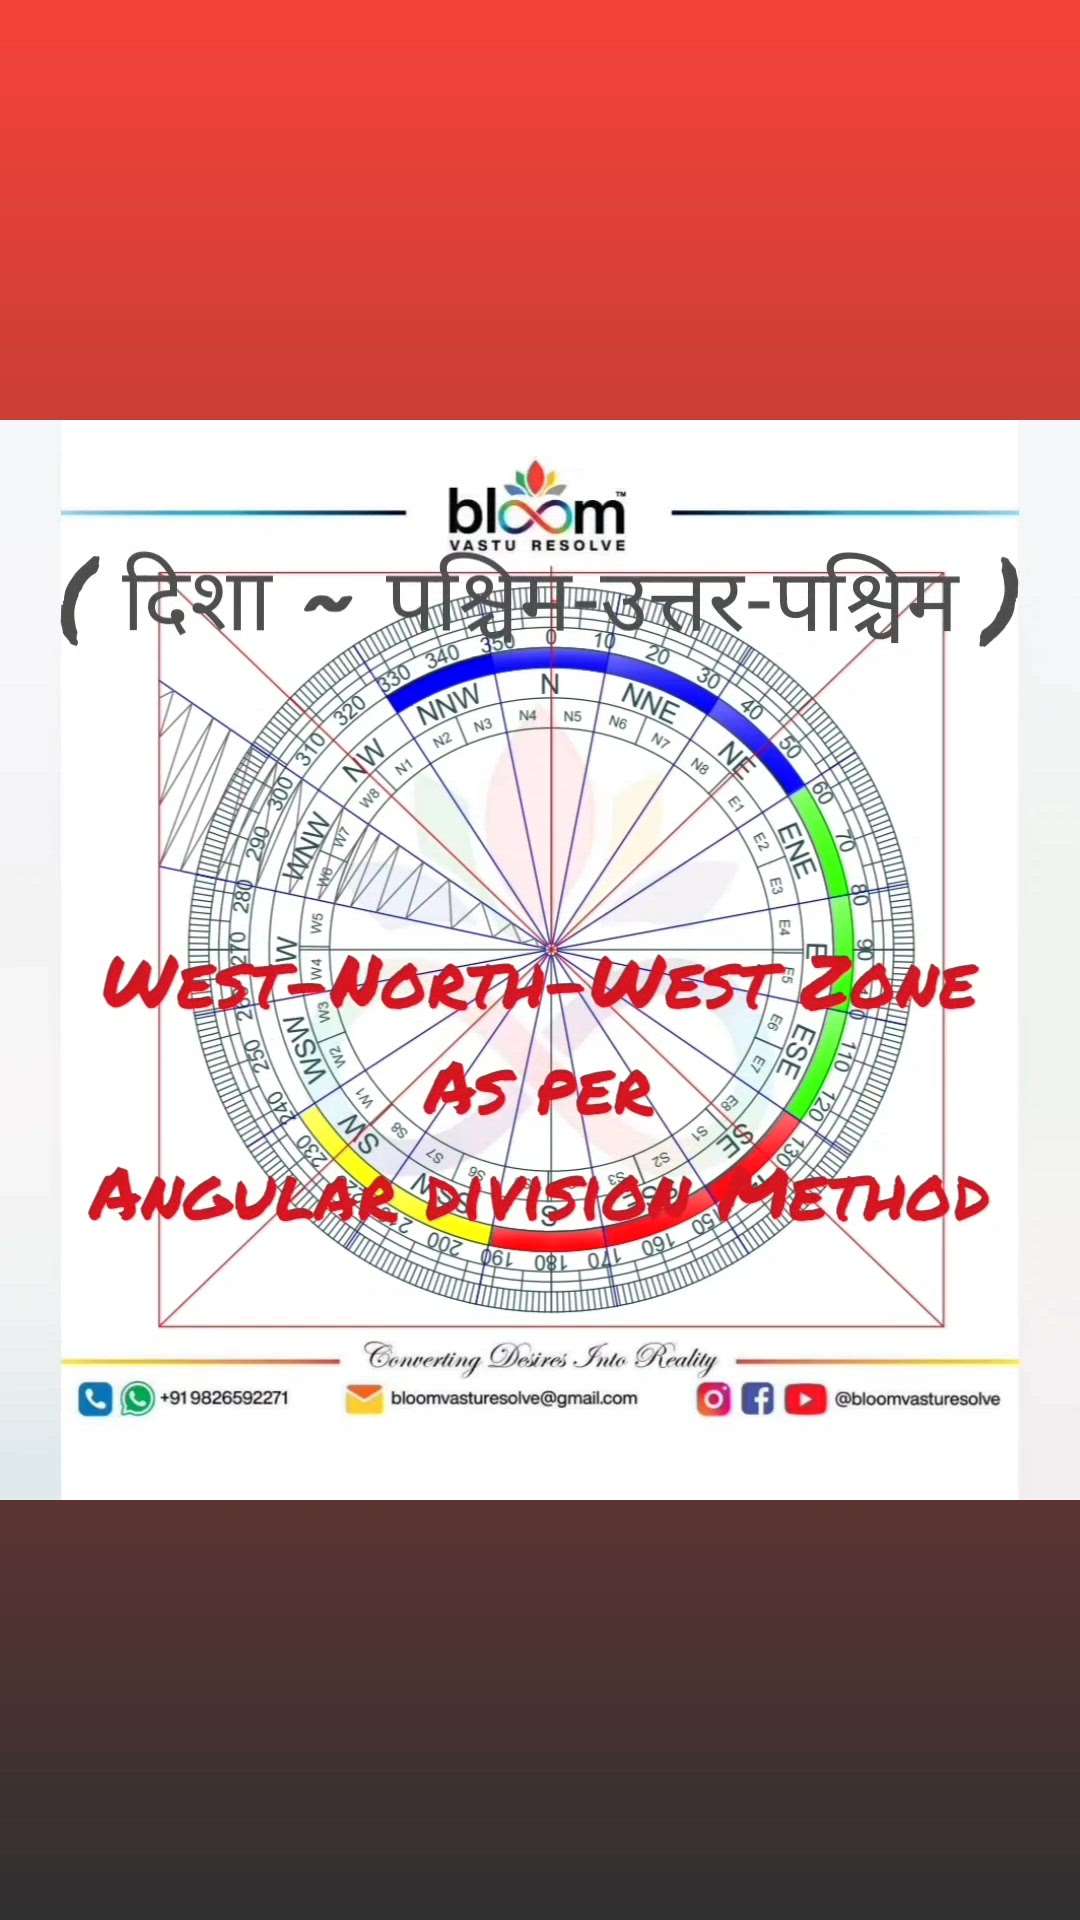 Your queries and comments are always welcome.
For more Vastu please follow @bloomvasturesolve
on YouTube, Instagram & Facebook
.
.
For personal consultation, feel free to contact certified MahaVastu Expert through
M - 9826592271
Or
bloomvasturesolve@gmail.com

#vastu 
#mahavastu #mahavastuexpert
#bloomvasturesolve
#vastuforhome
#vastuforbusiness
#vastutips 
#wnwzone